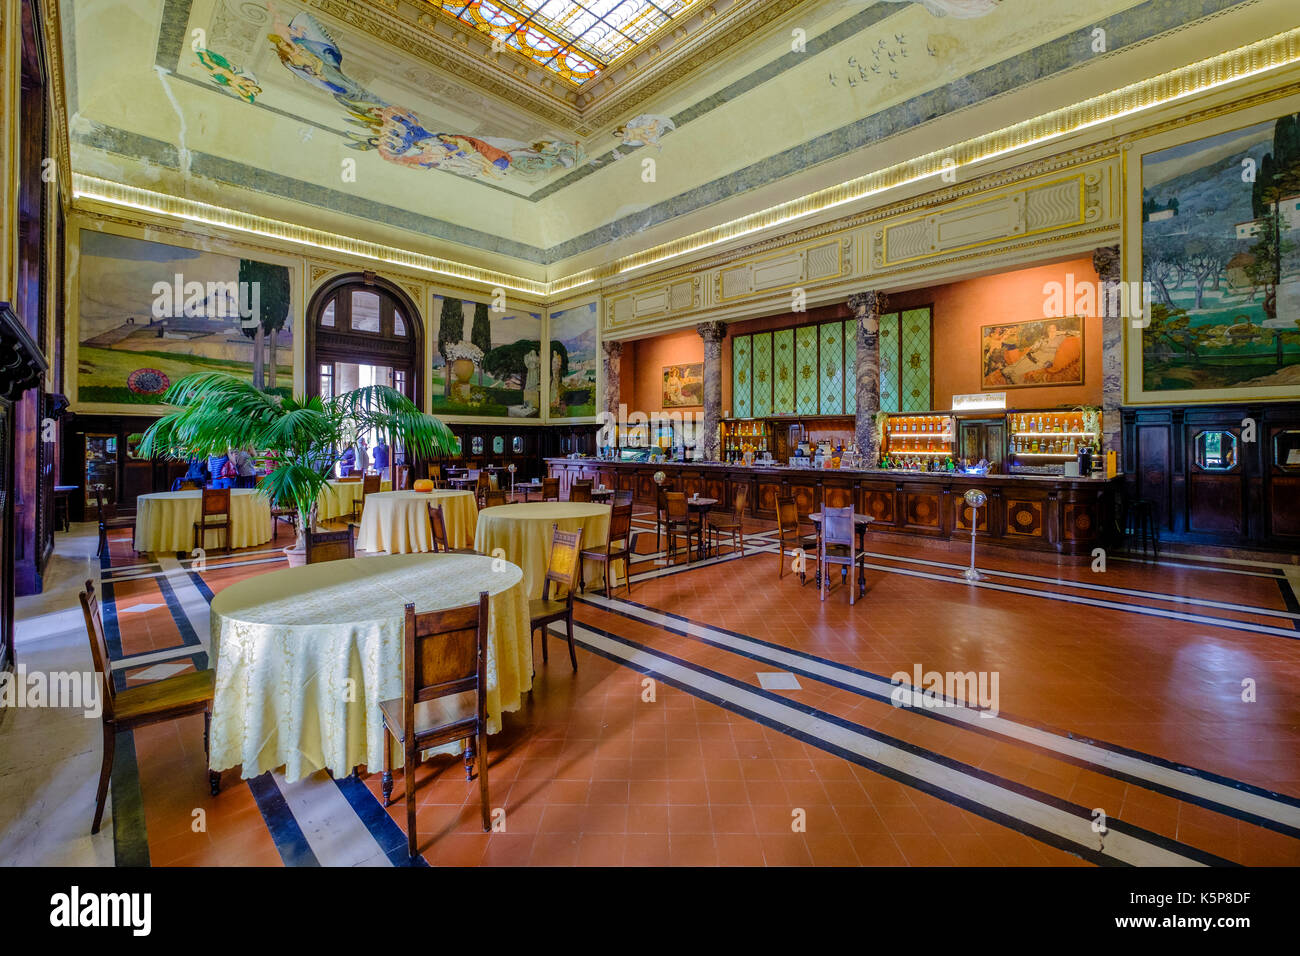 Interior of a restaurant of Tettuccio Terme, located in a splendid old building in a wonderful park Stock Photo